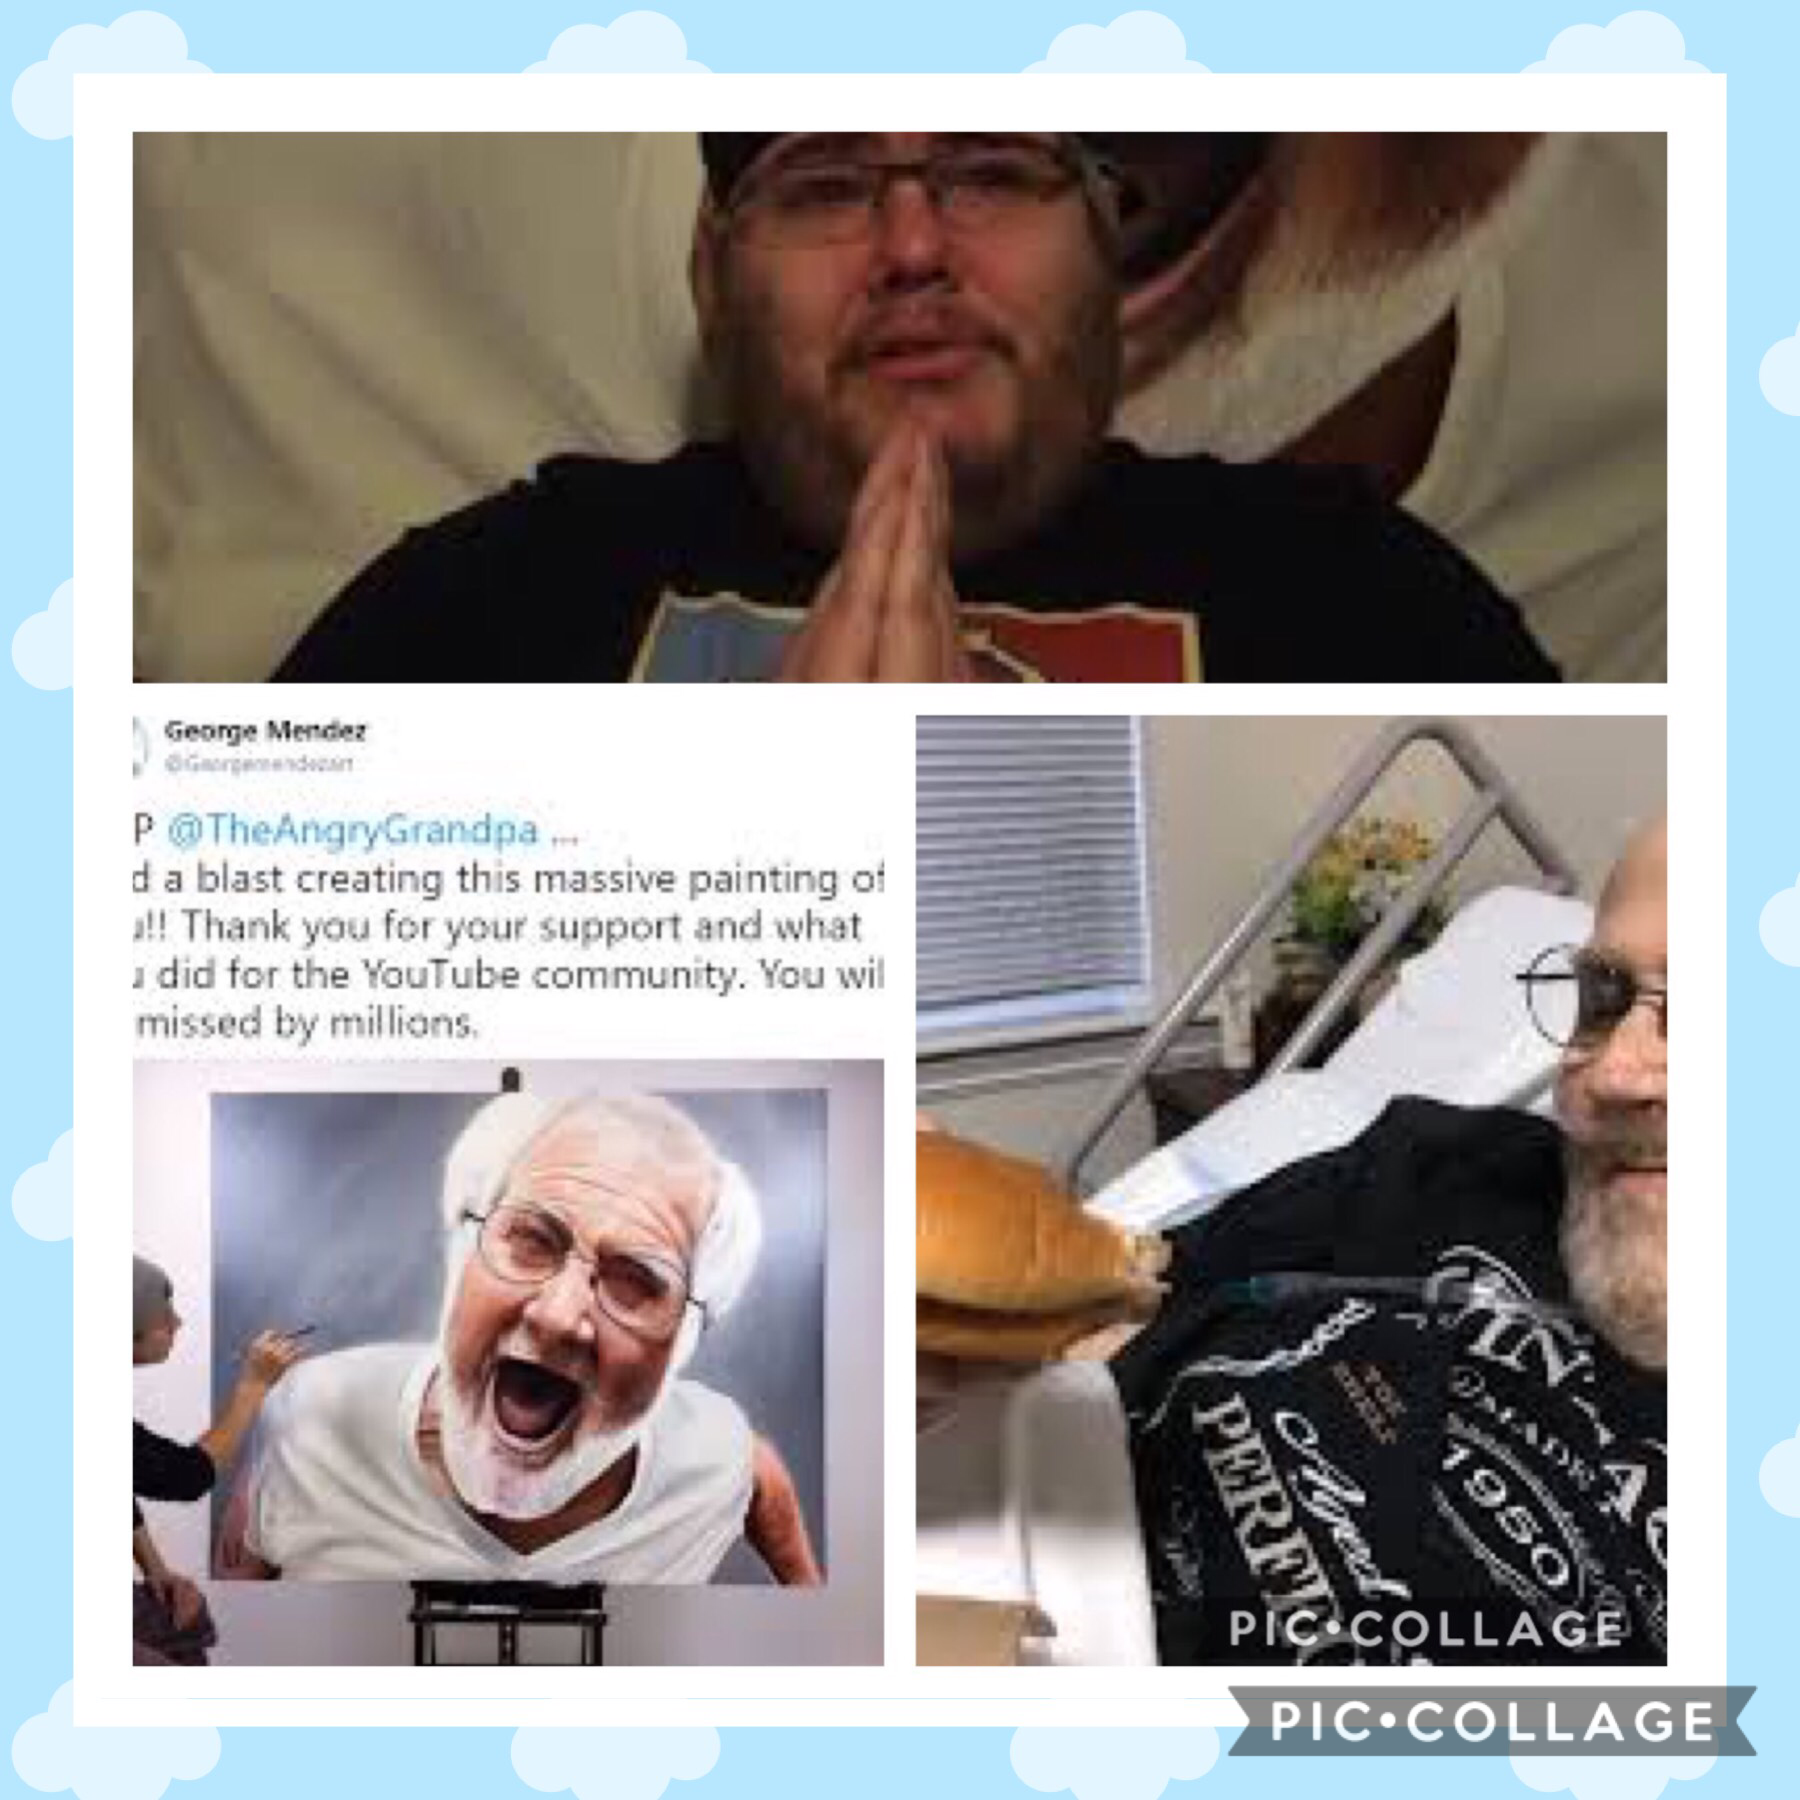 RIP angry grandpa we all miss u Michael ur son is gonna be dad soon his gf is 35 weeks pregnant Michael would have loved to see u again just all of ur fans #agparmyforever love u agp ❤️❤️❤️